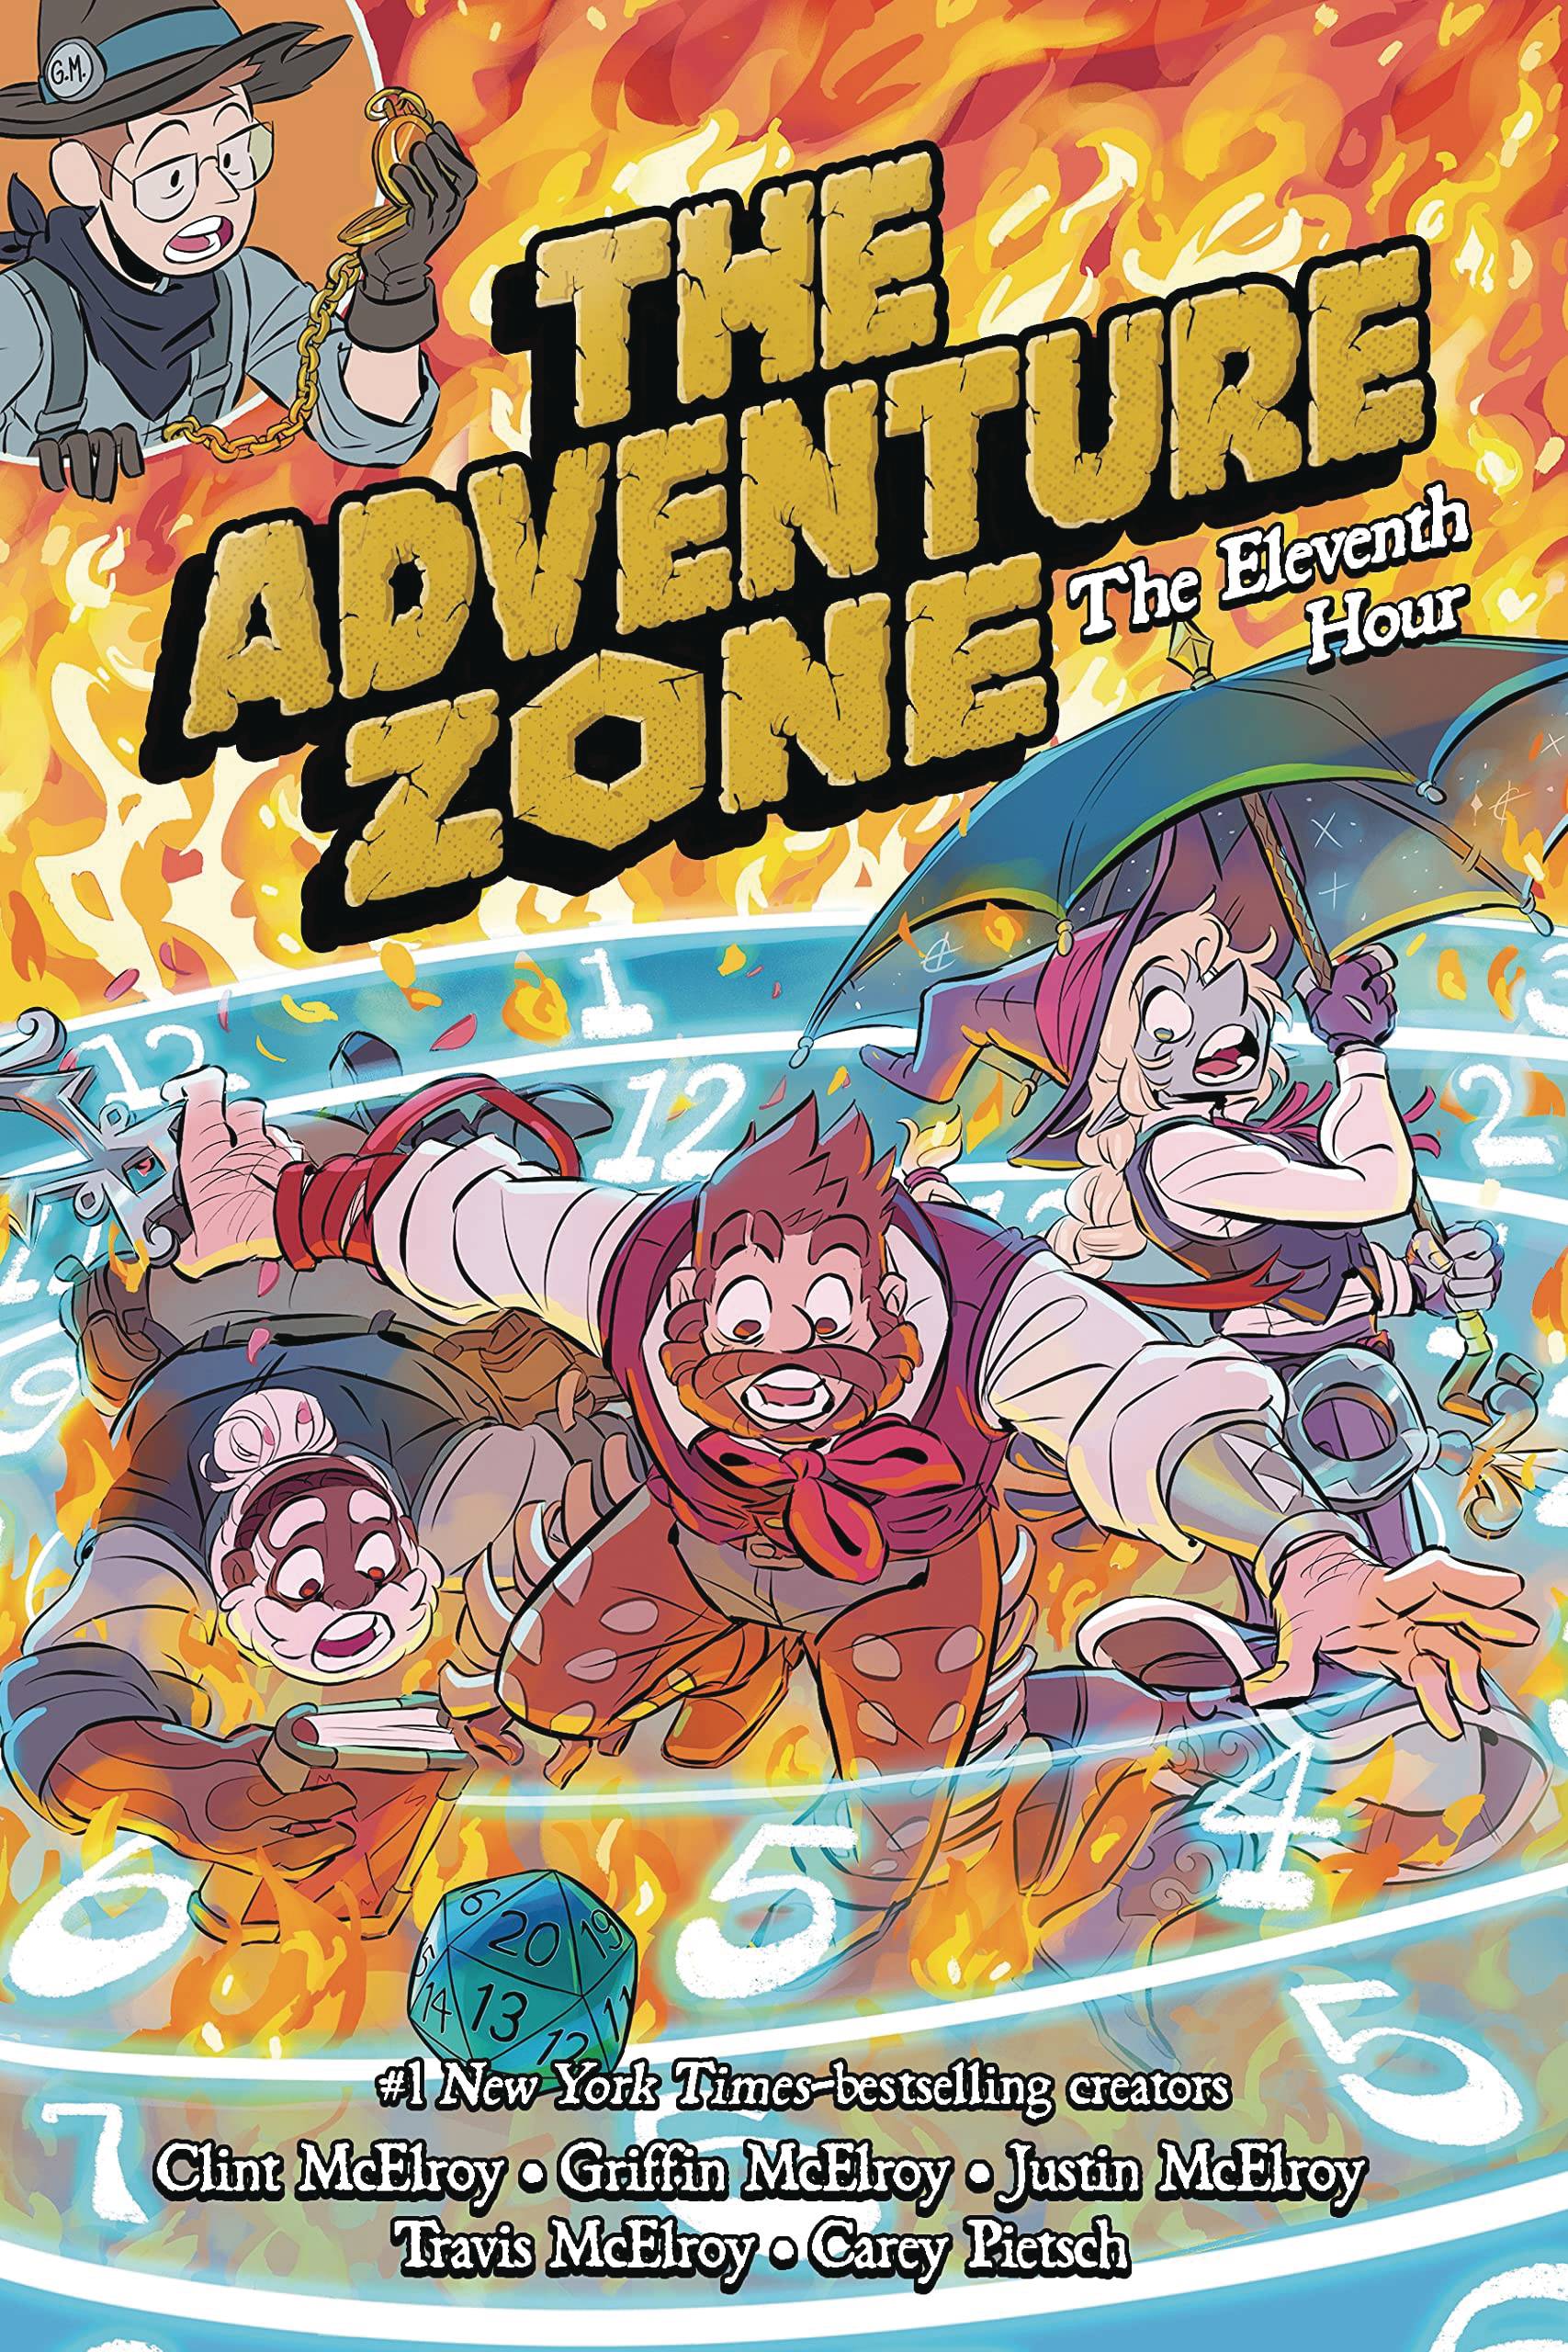 The Adventure Zone vol 5: The Eleventh Hour s/c